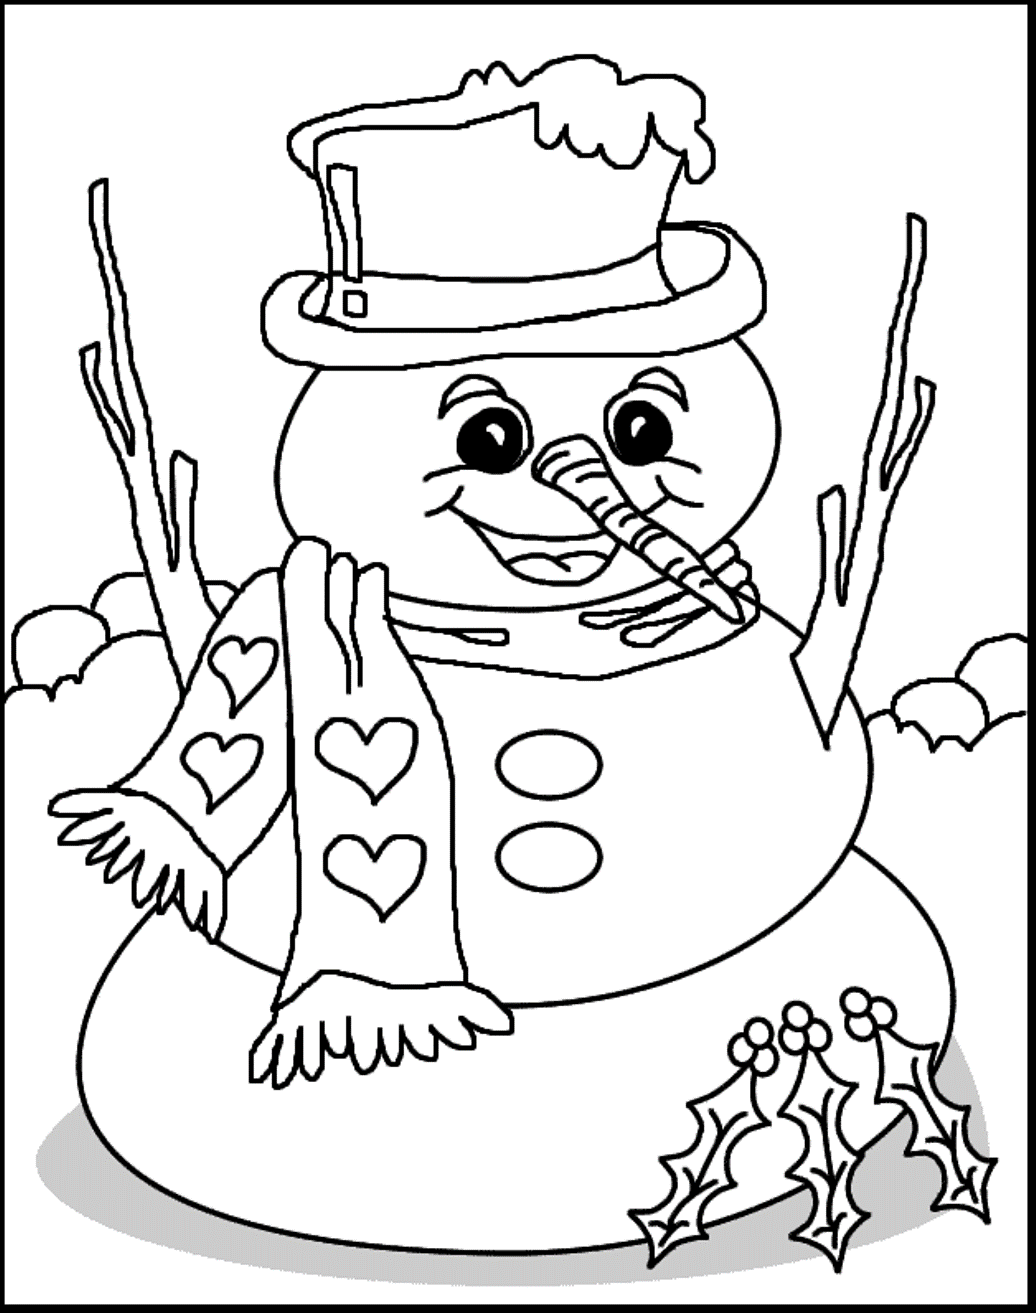 Winter Sports Coloring Pages Free Printable Coloring Sheets Winter ...